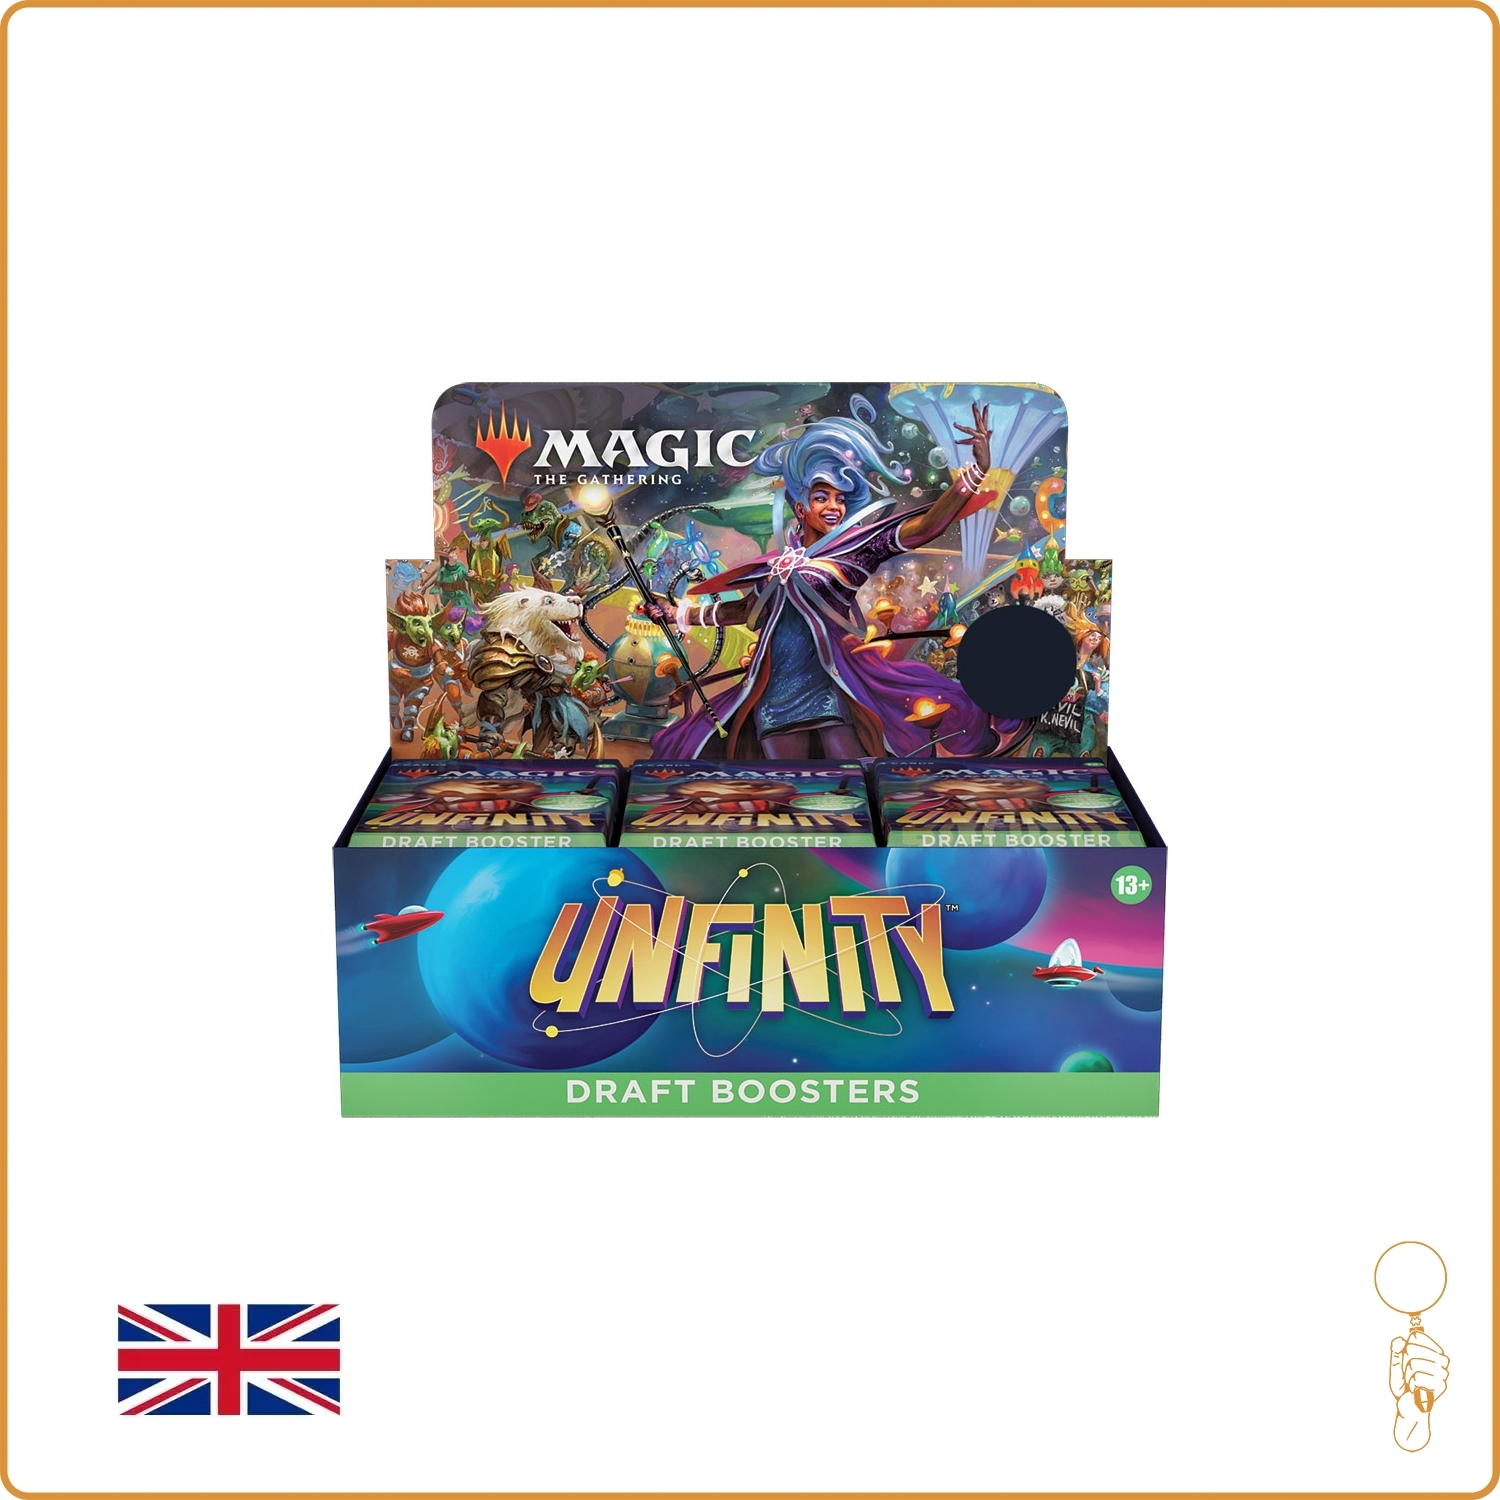 Display - Magic the Gathering - Unfinity - 36 boosters de Draft - Scellé - Anglais Wizards of the Coast - 1